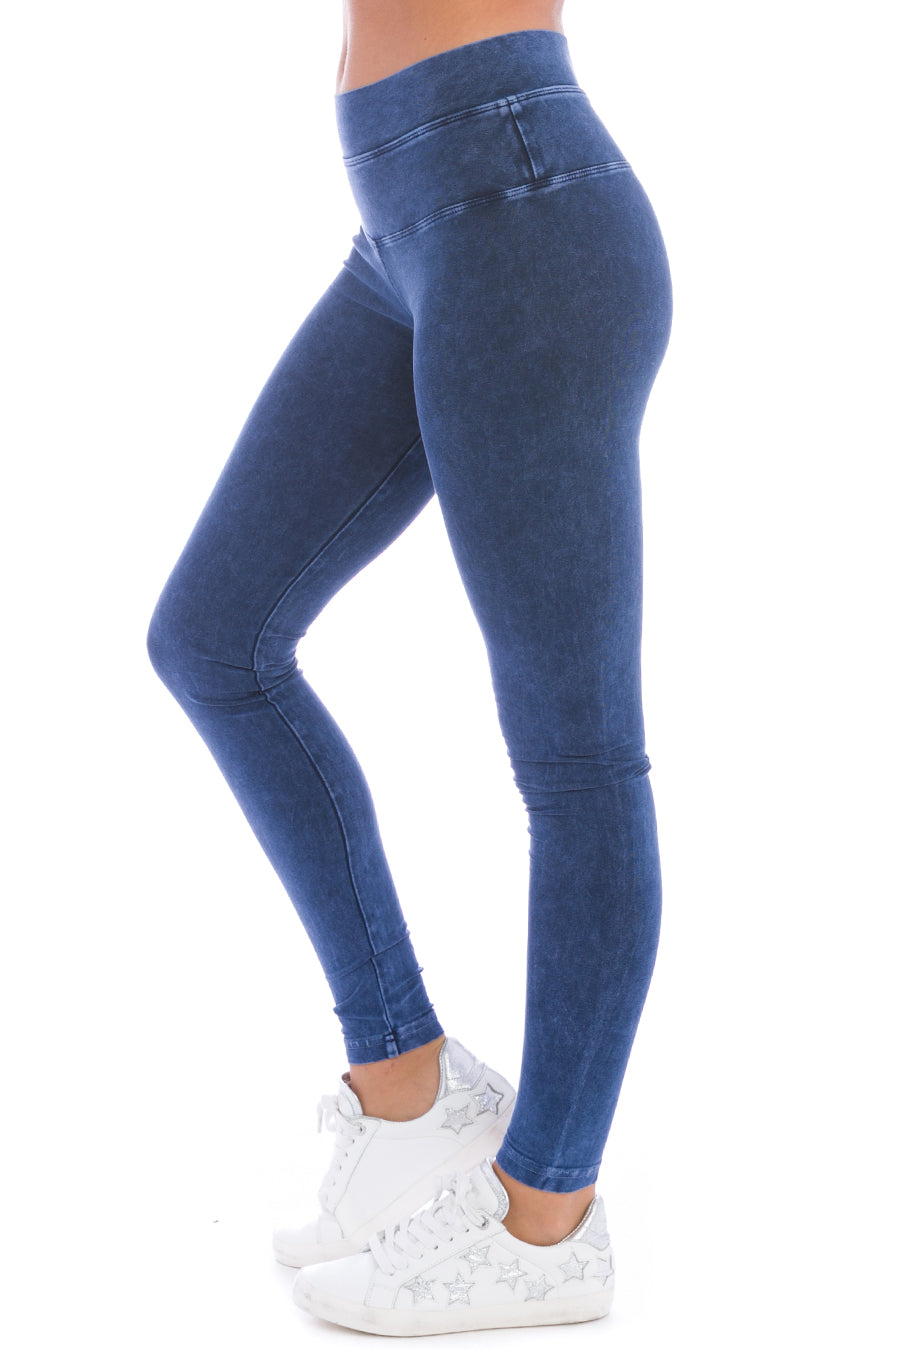 NUX NUX One by One Legging Mineral Wash